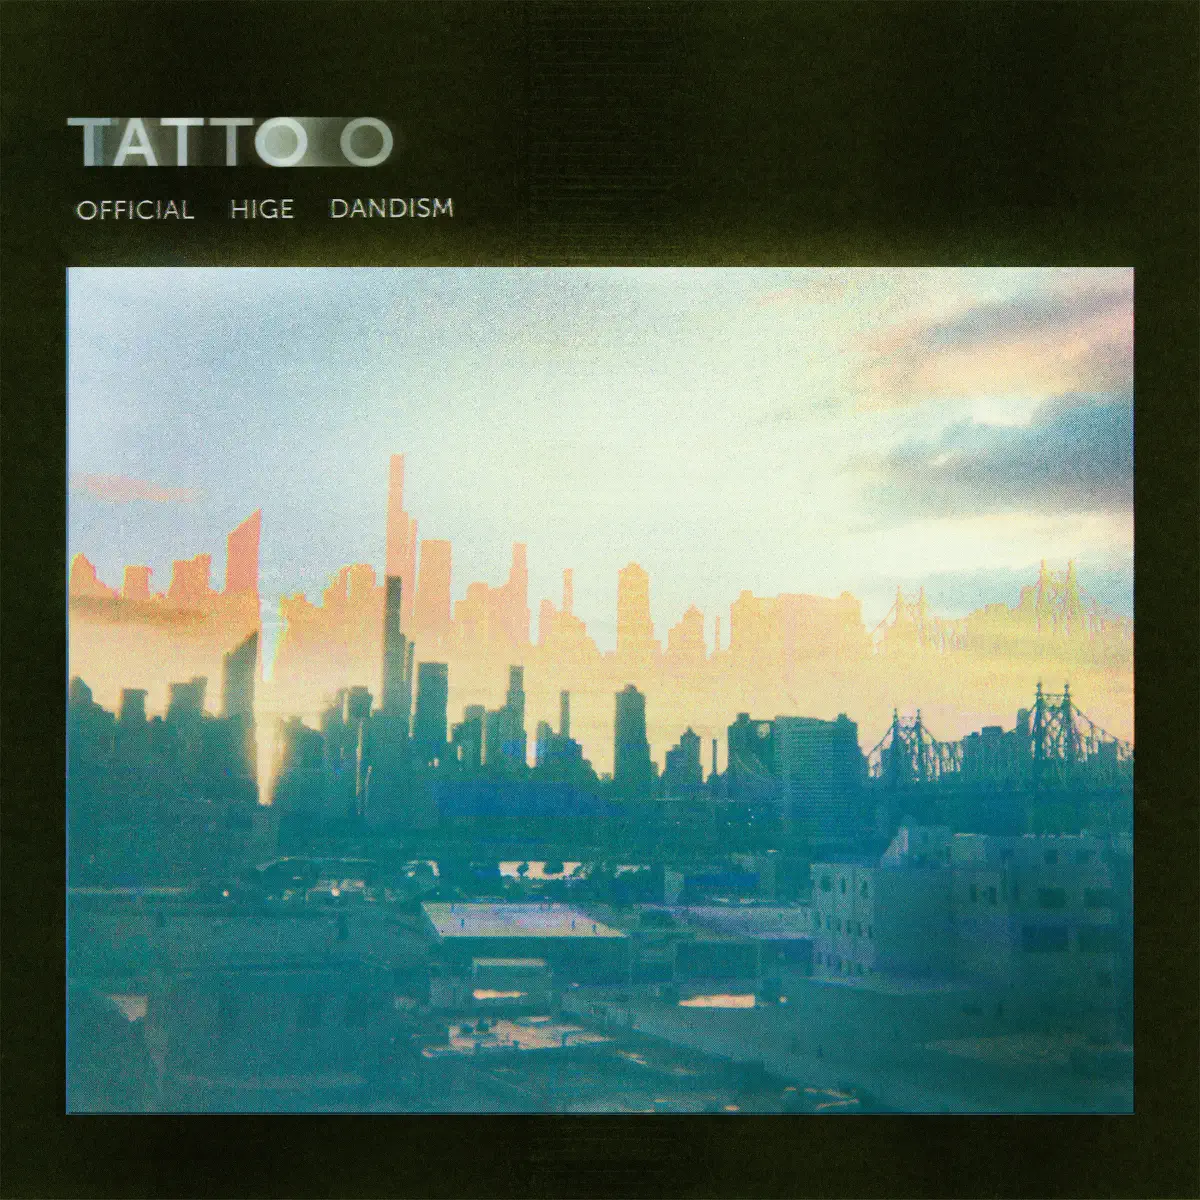 Official髭男dism - Tattoo - Single (2023) [iTunes Plus AAC M4A]-新房子